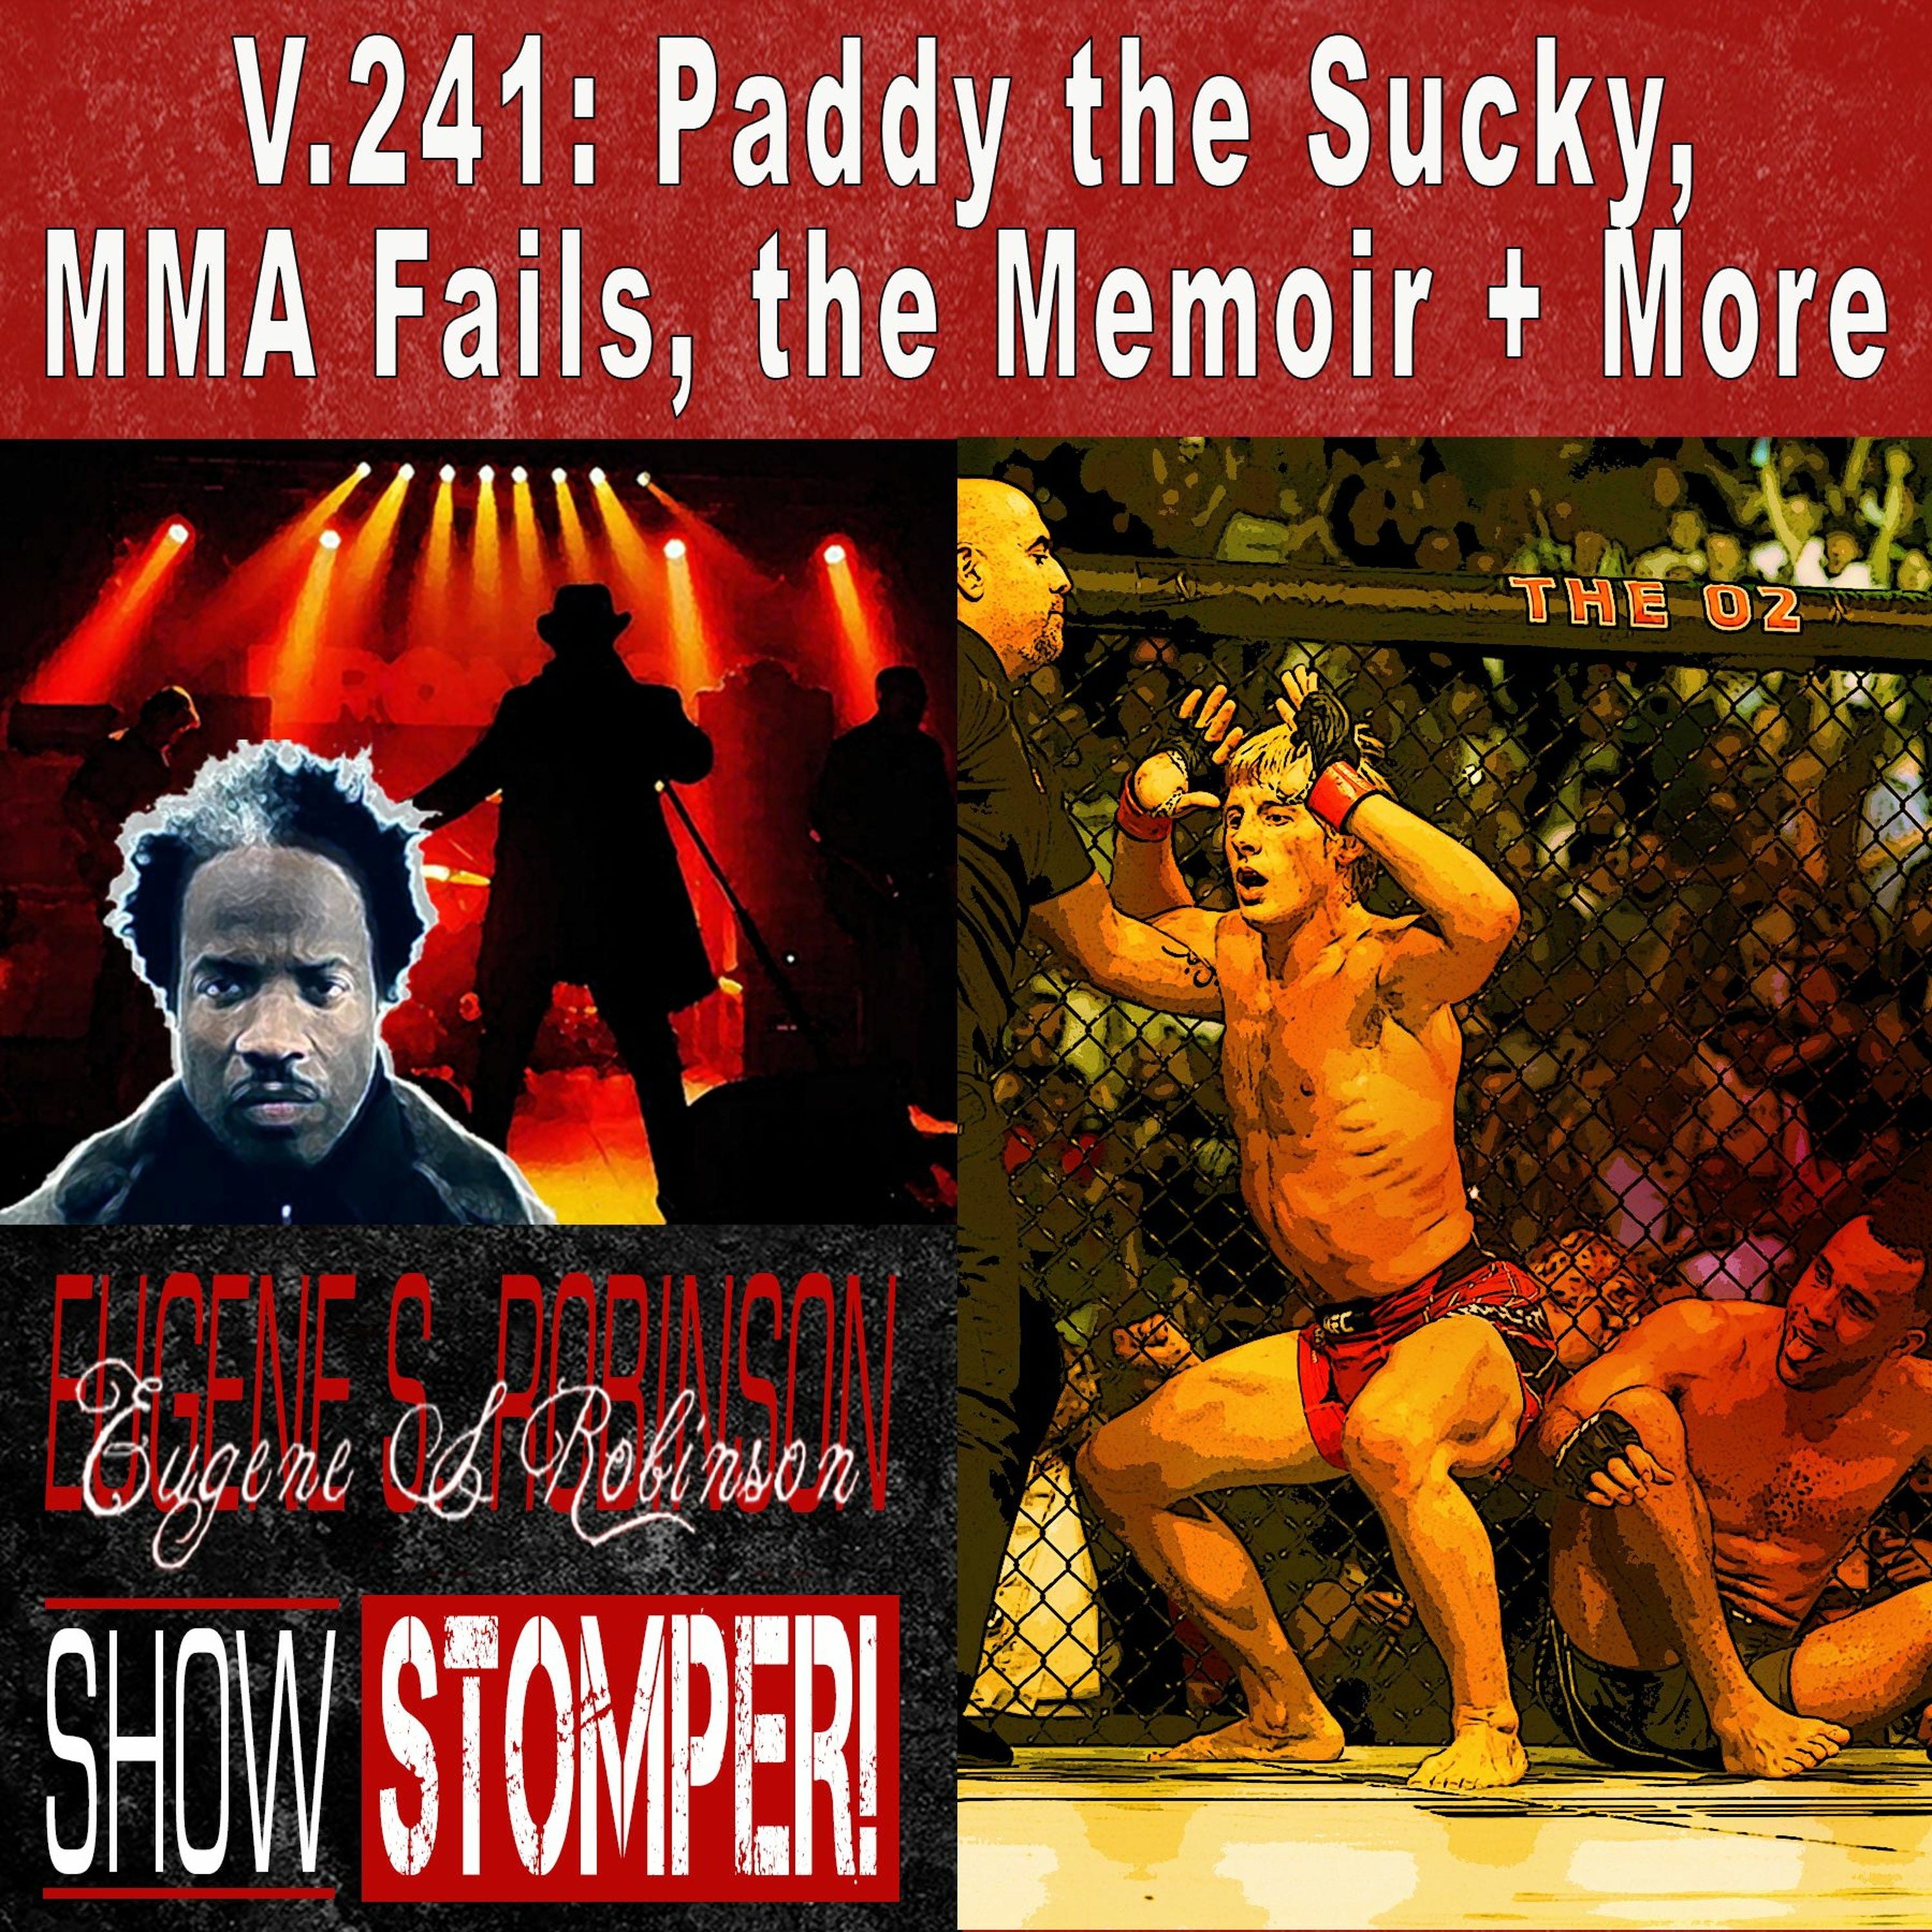 V.241: Paddy the Sucky, MMA Fails, the Memoir + More On The Eugene S. Robinson Show Stomper!